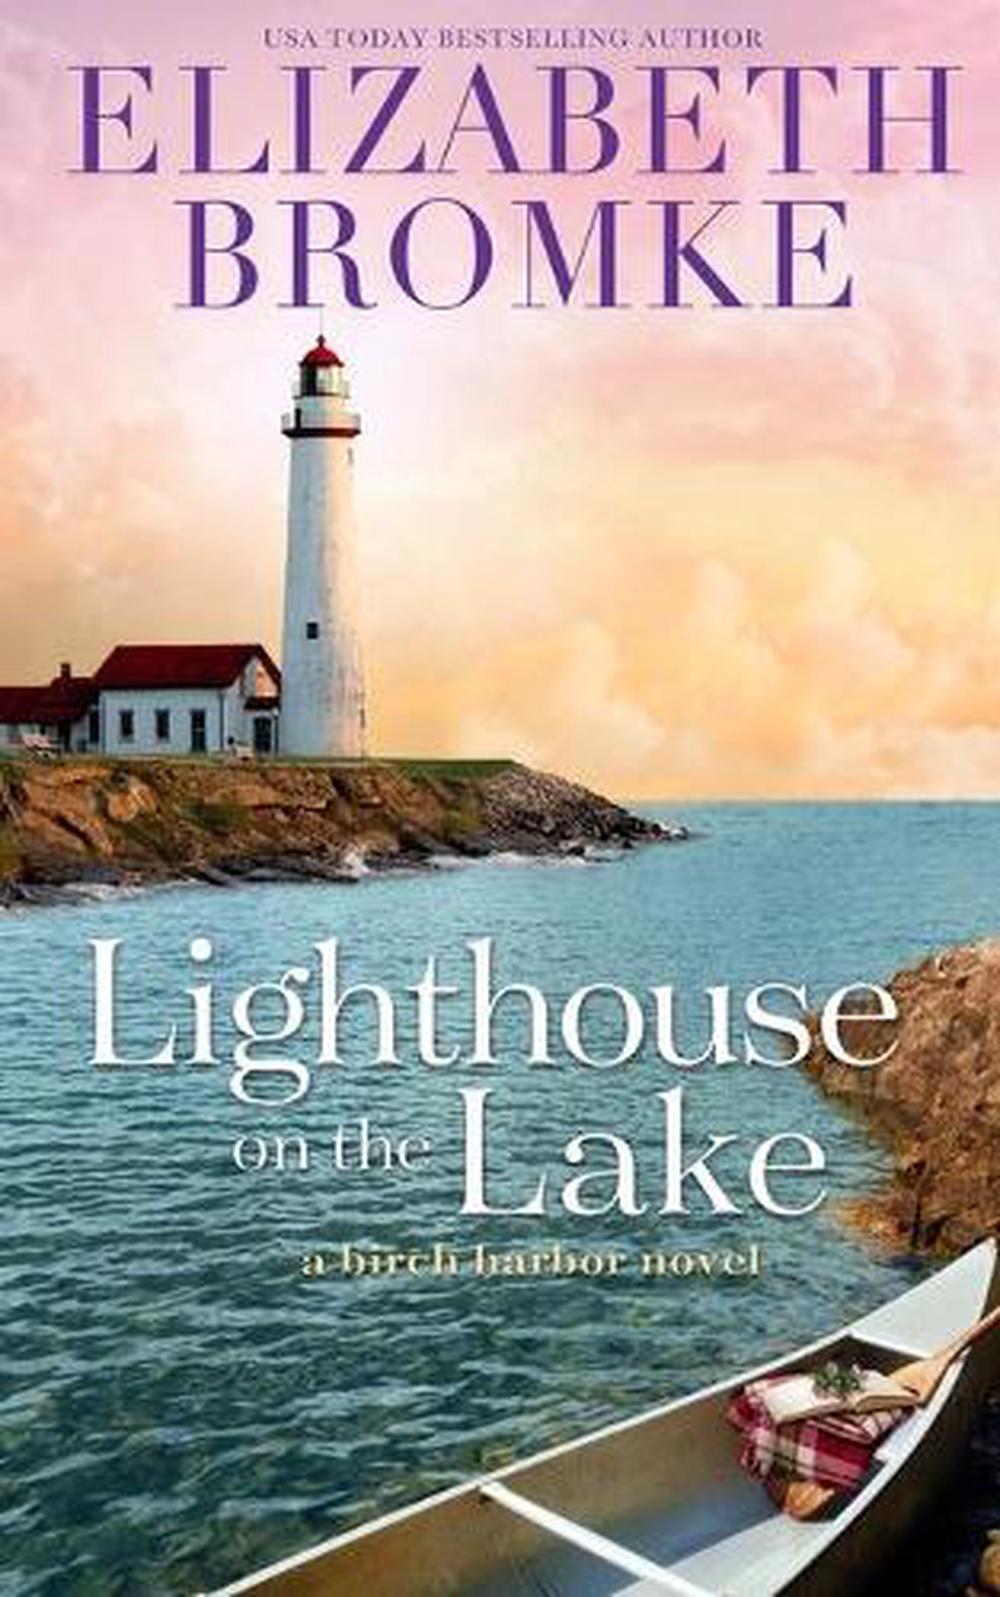 the lighthouse book pd james